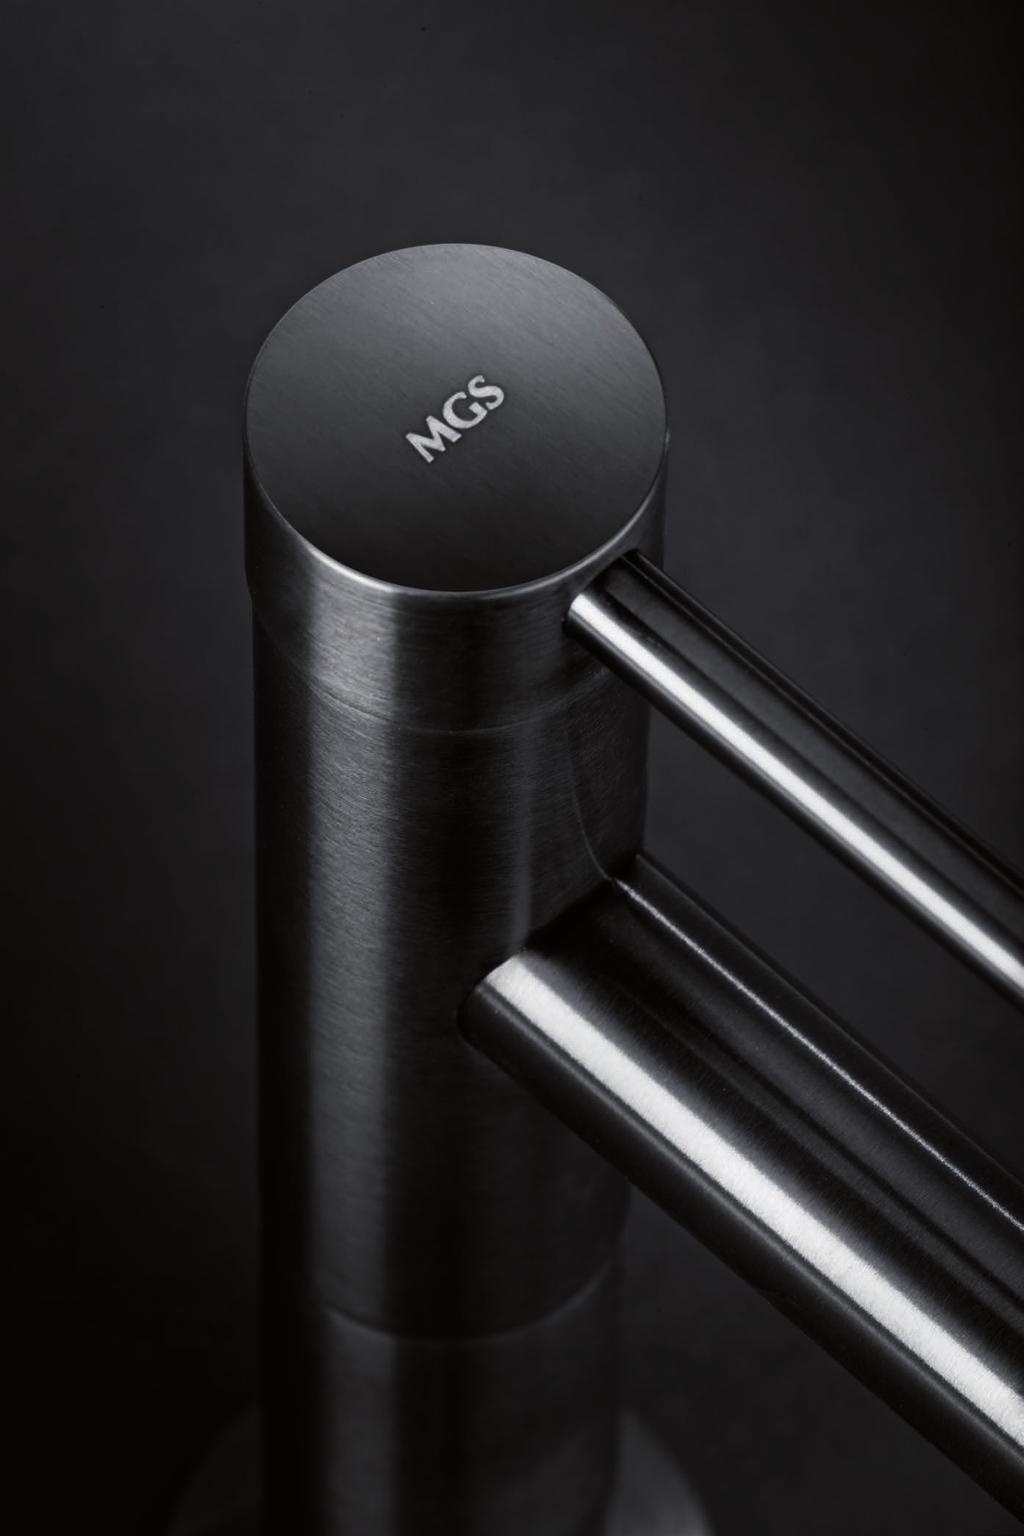 penetrates the metal by molecular bonding, resulting in a smooth, durable, matte black finish that is consistent throughout every component of the faucet design Questa finitura su acciaio satinato è